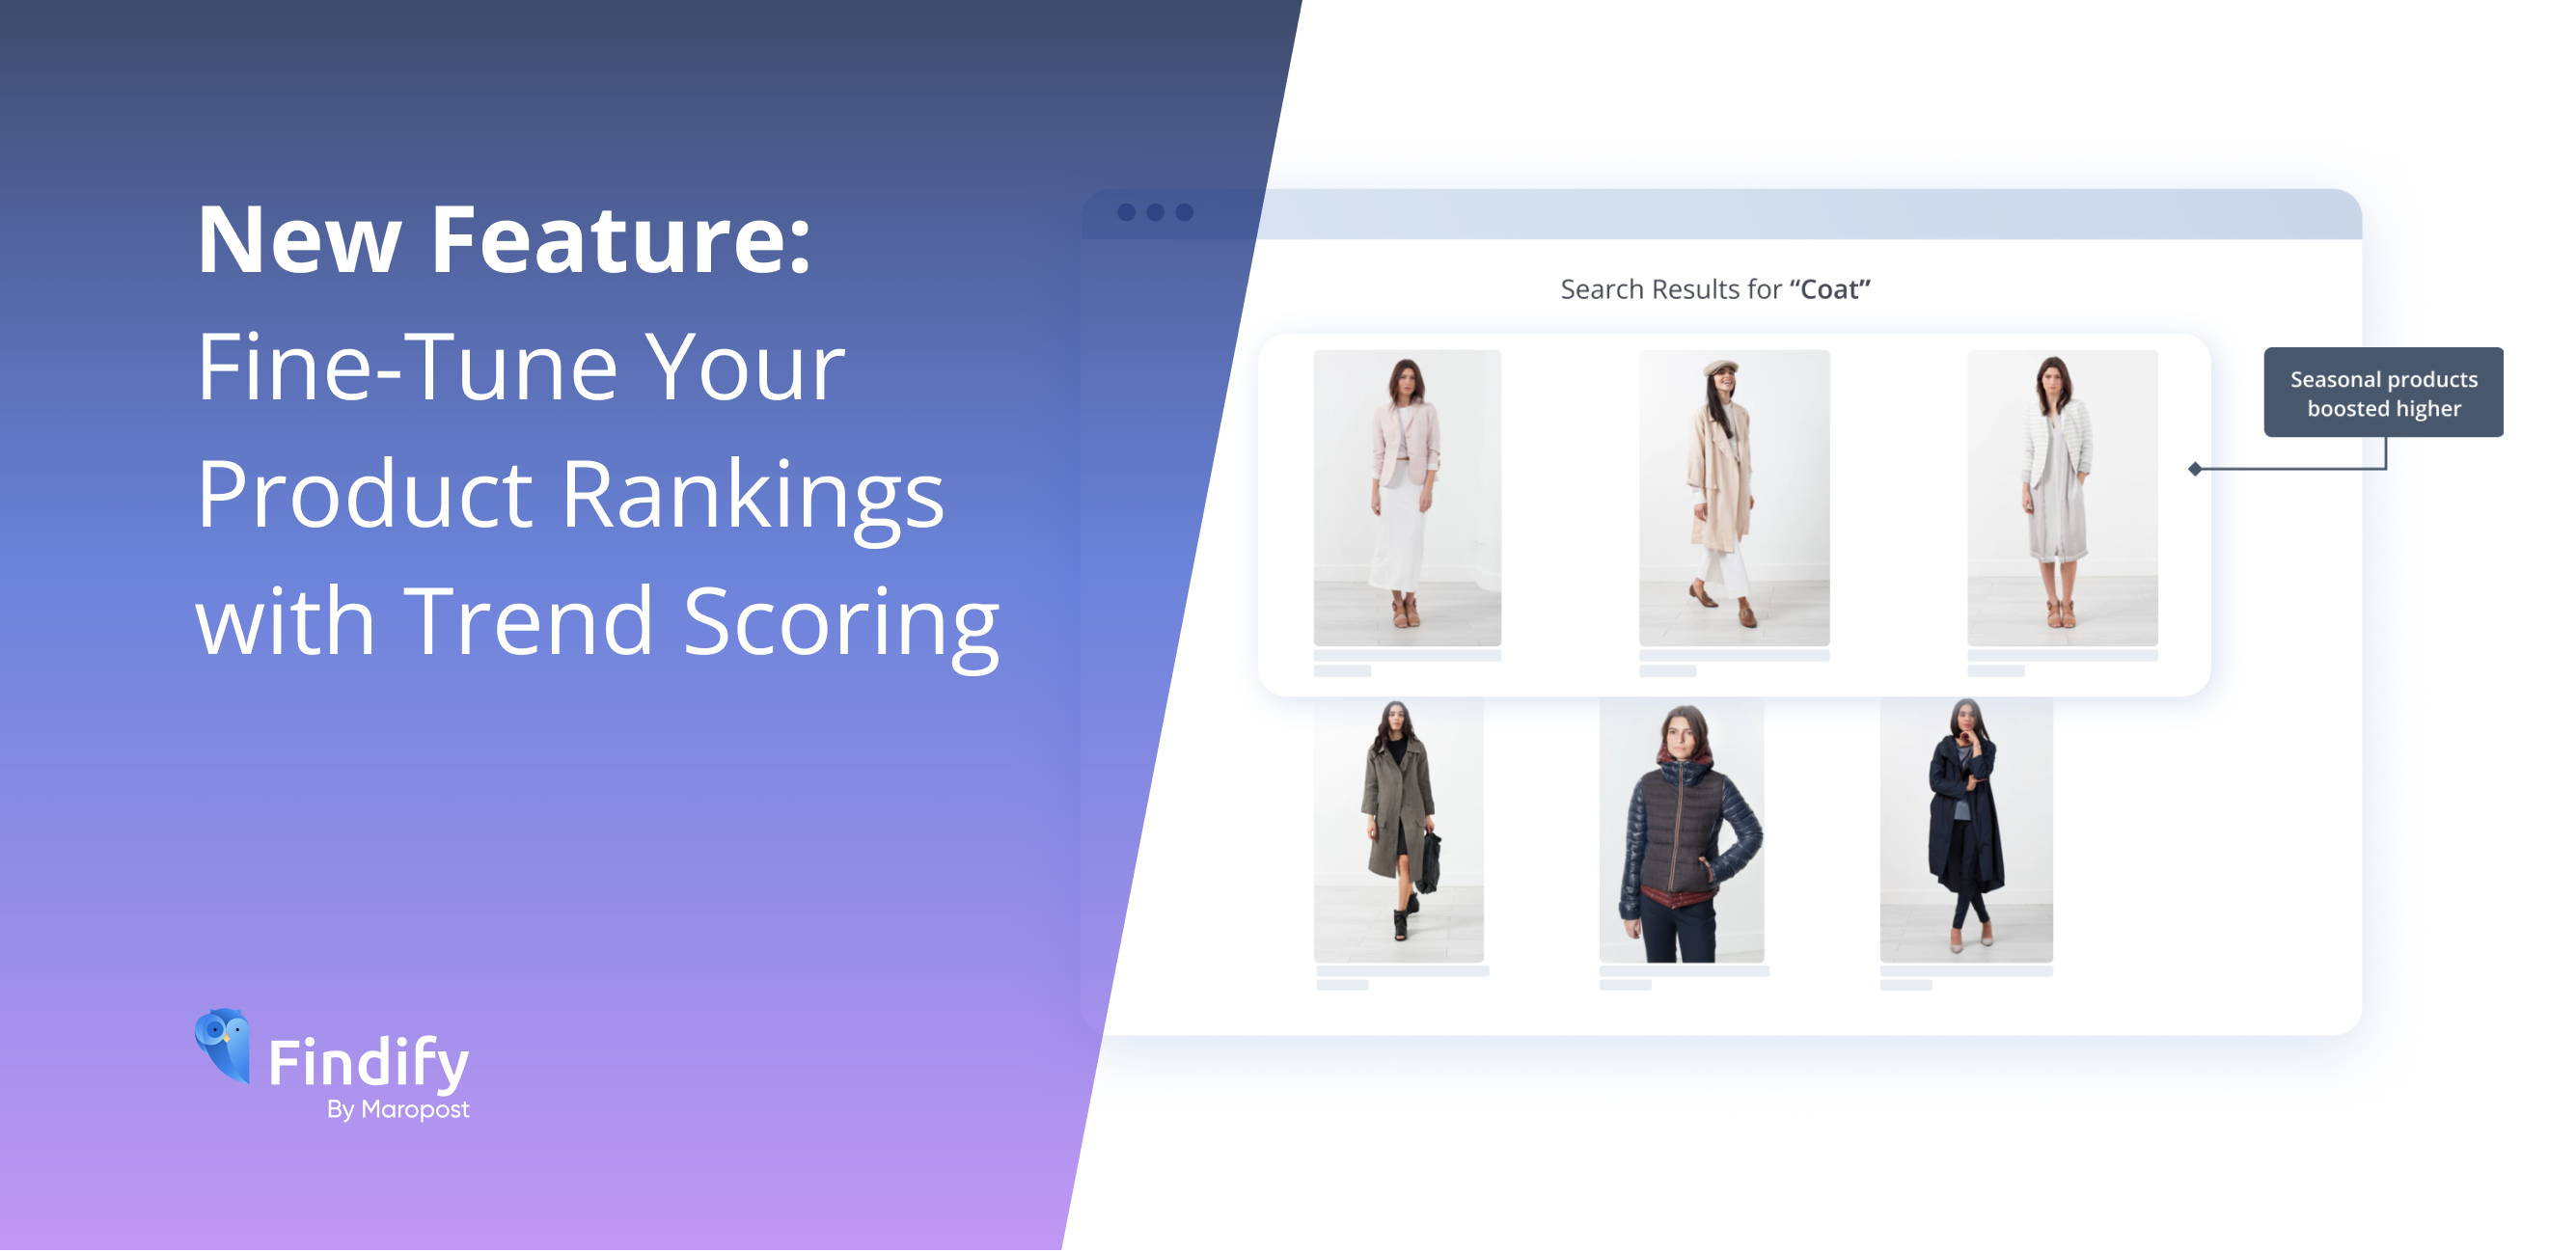 Findify's new trend scoring feature